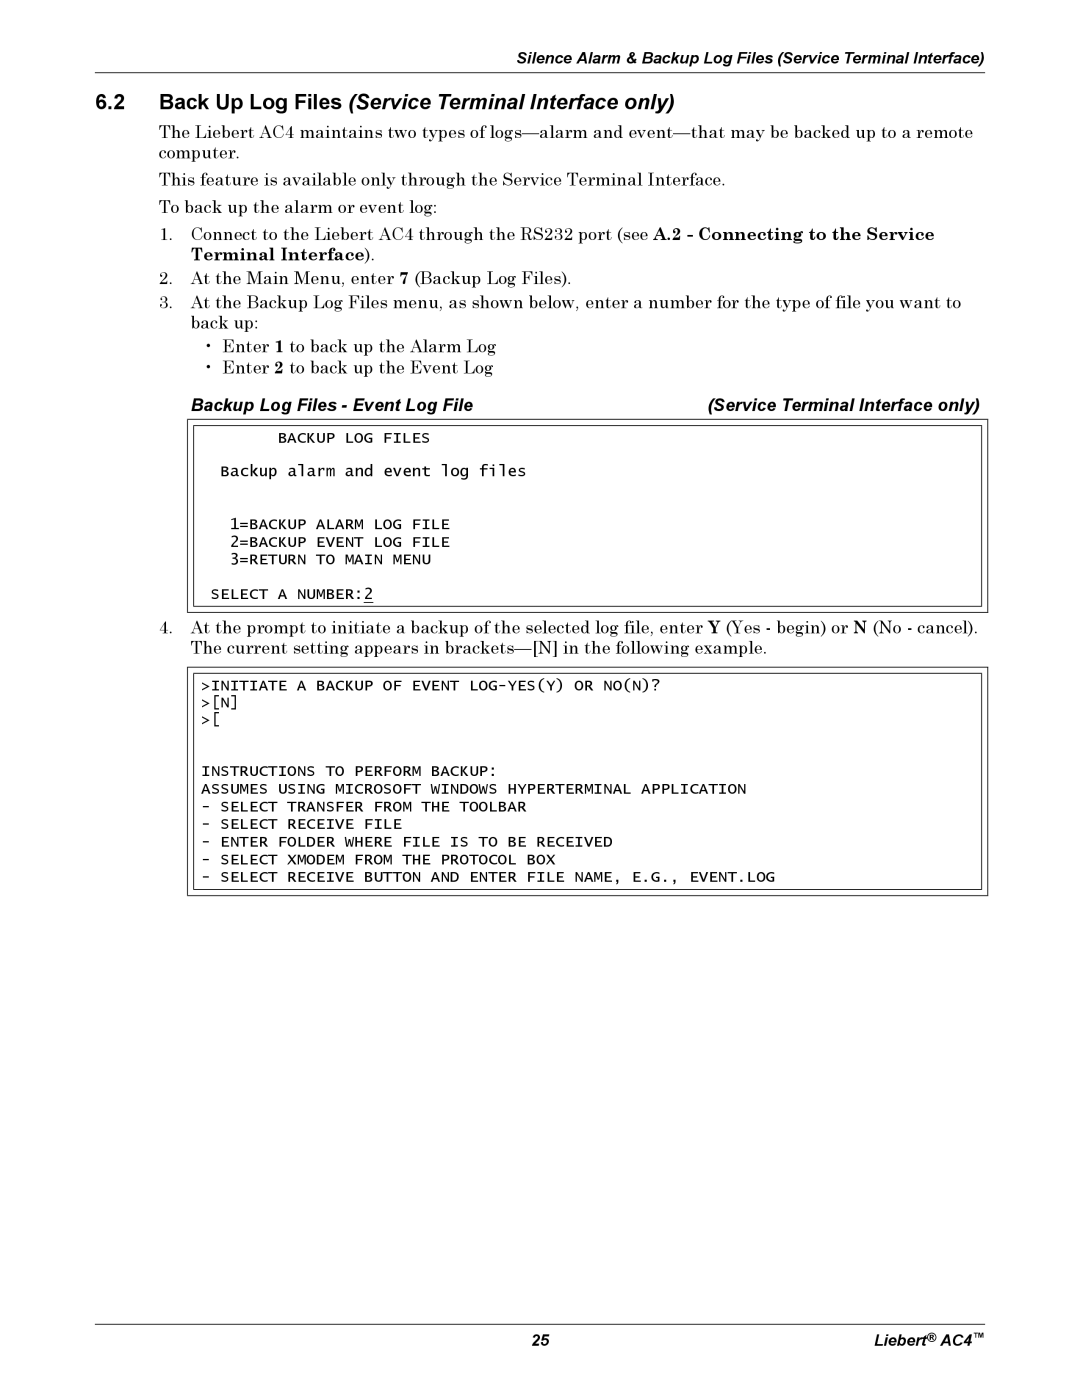 Emerson AC4 user manual Backup Log Files - Event Log File, Service Terminal Interface only 